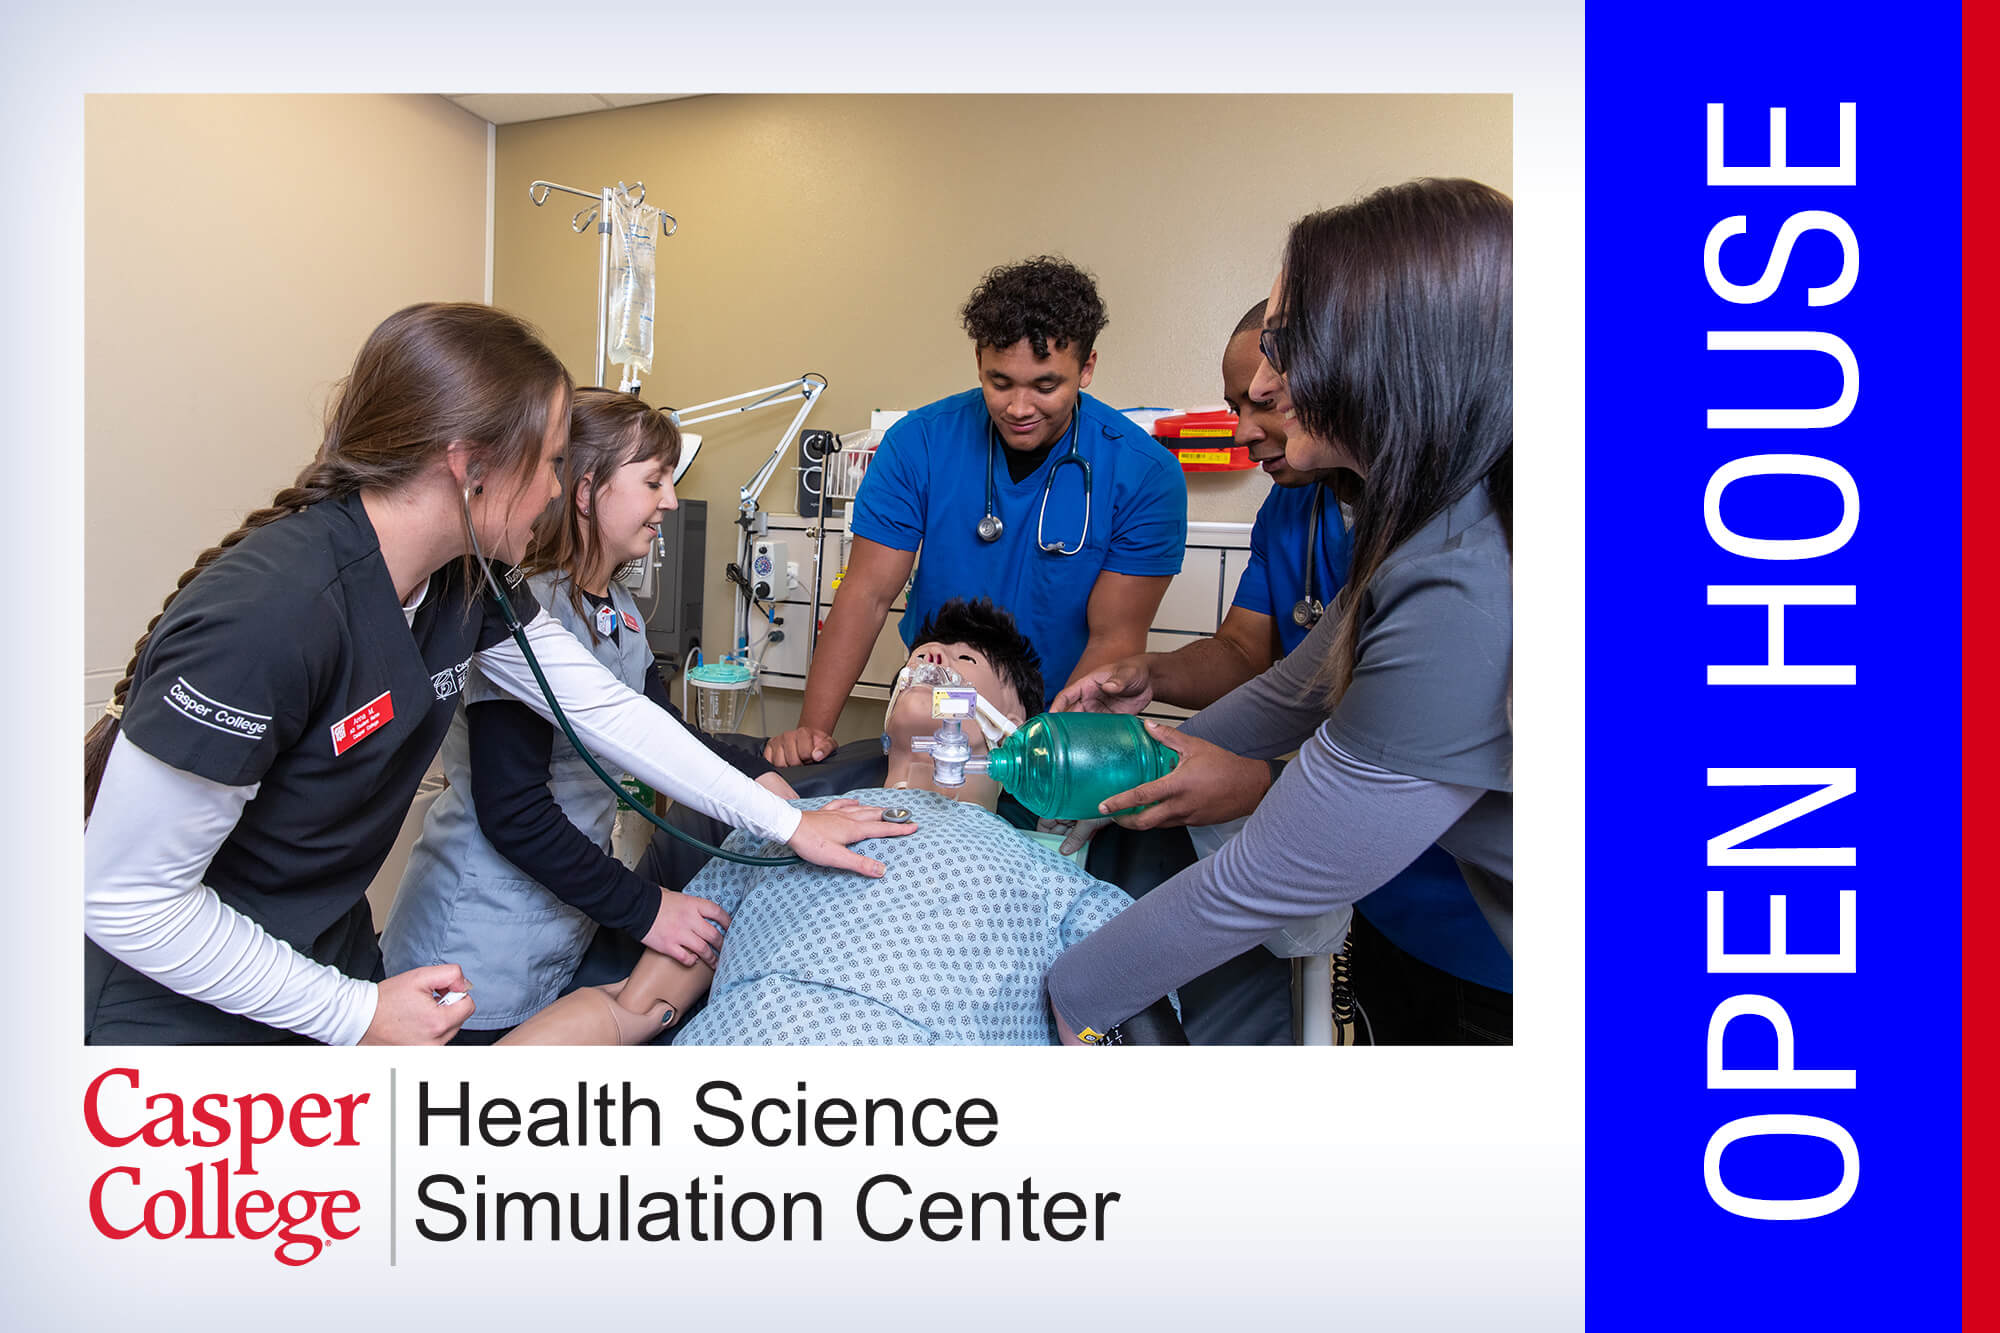 Image for simulation center open house press release.